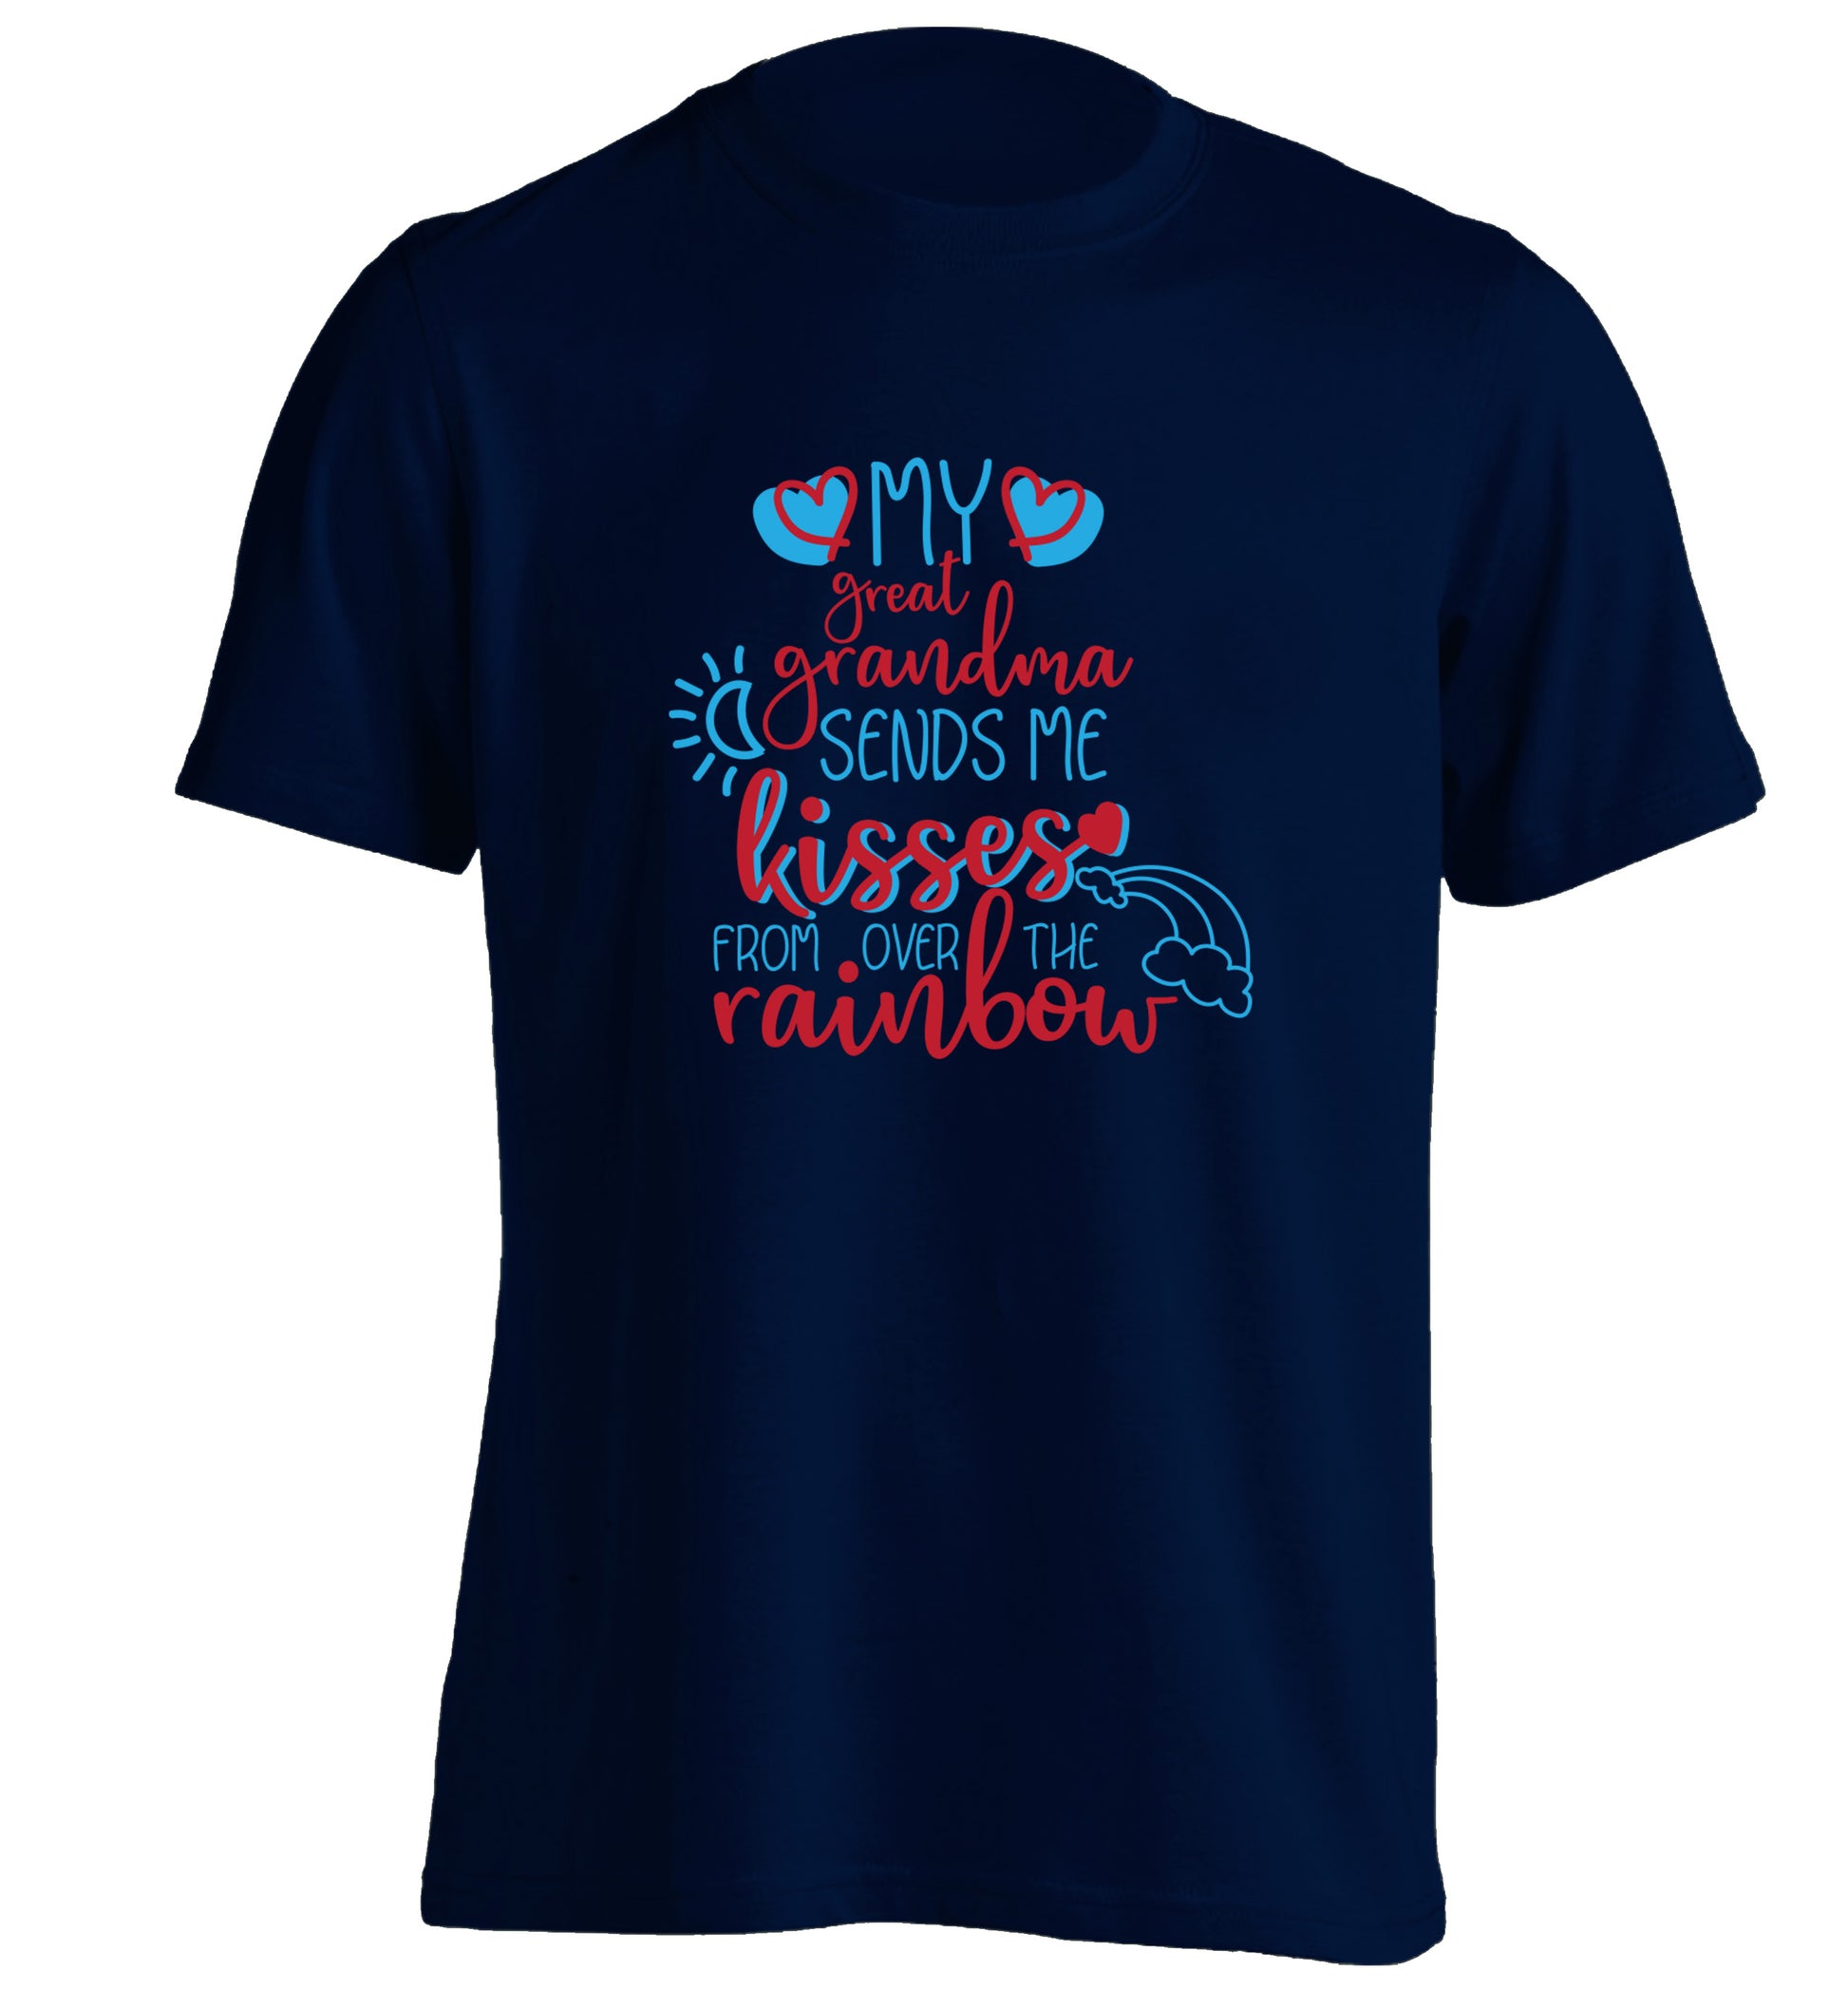 My great grandma sends me kisses from over the rainbow adults unisex navy Tshirt 2XL